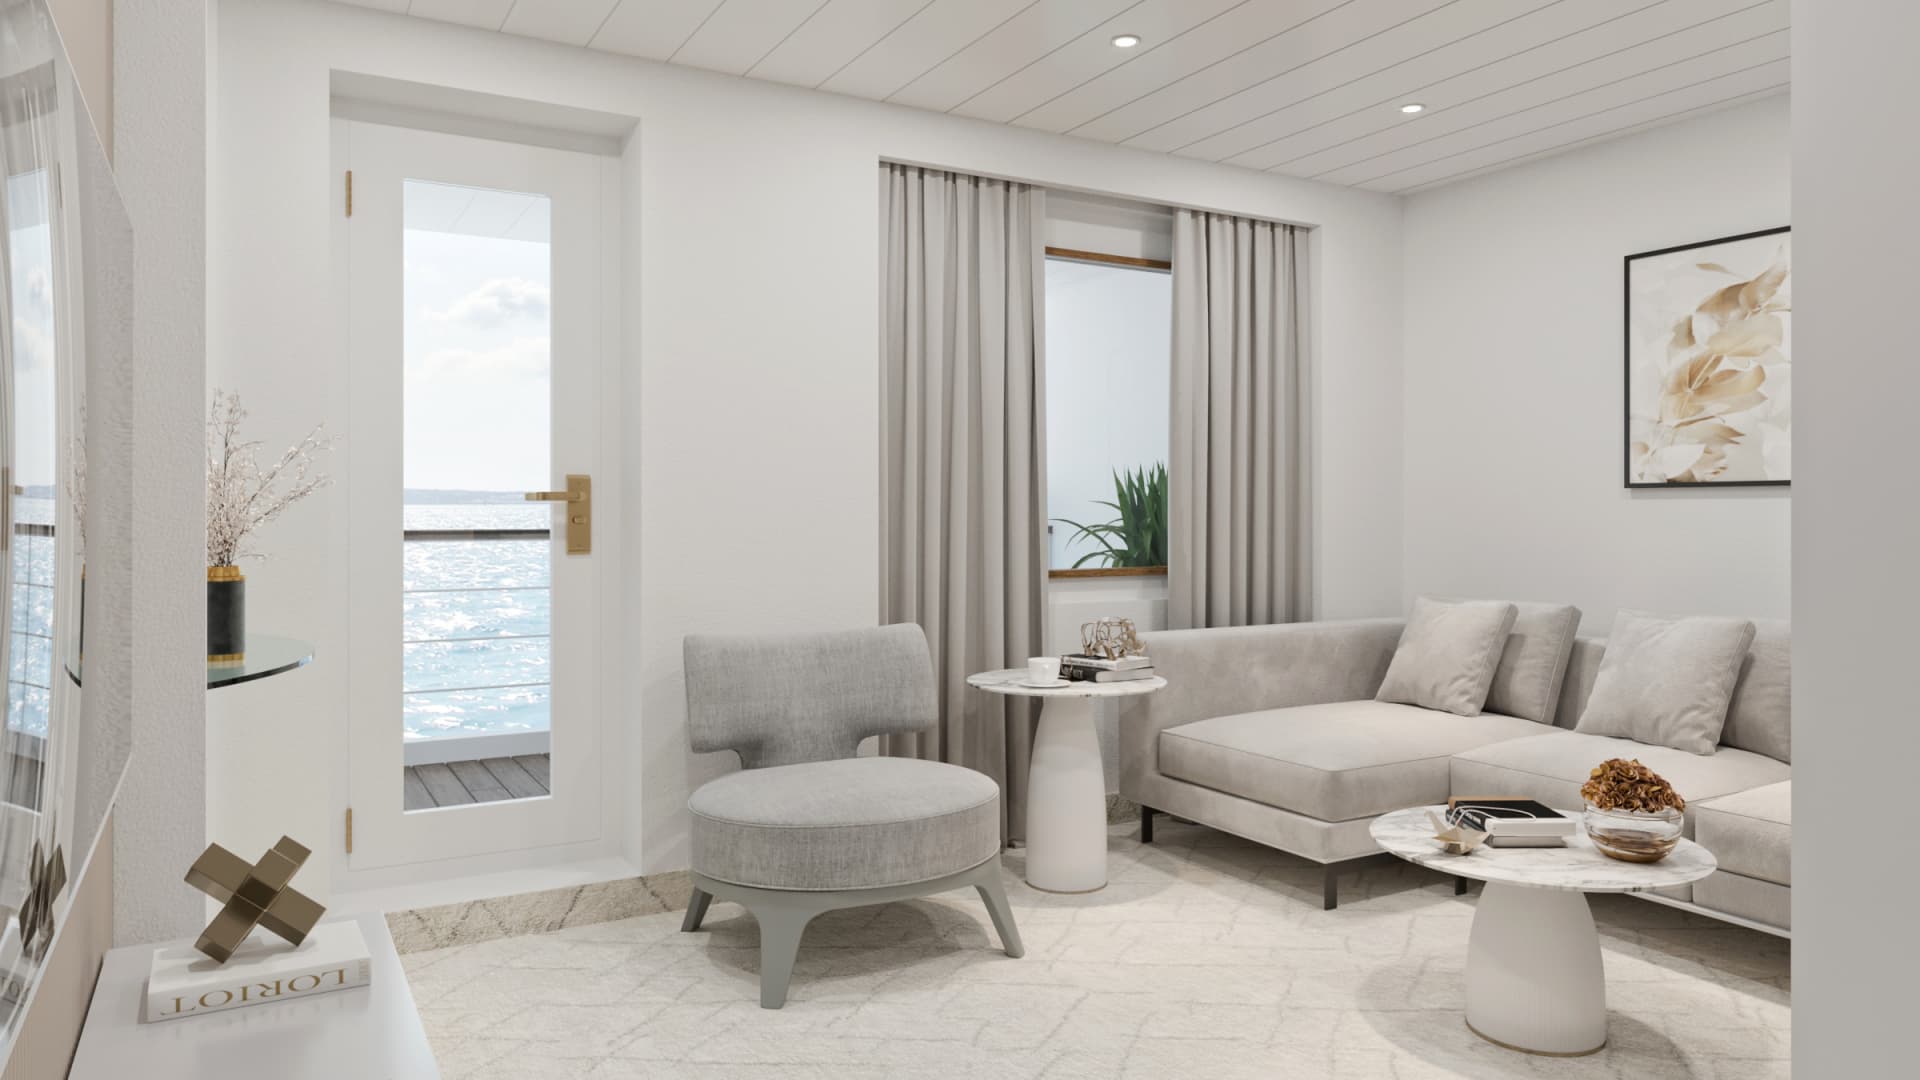 A balcony suite on the MV Gemini is 260 square feet.